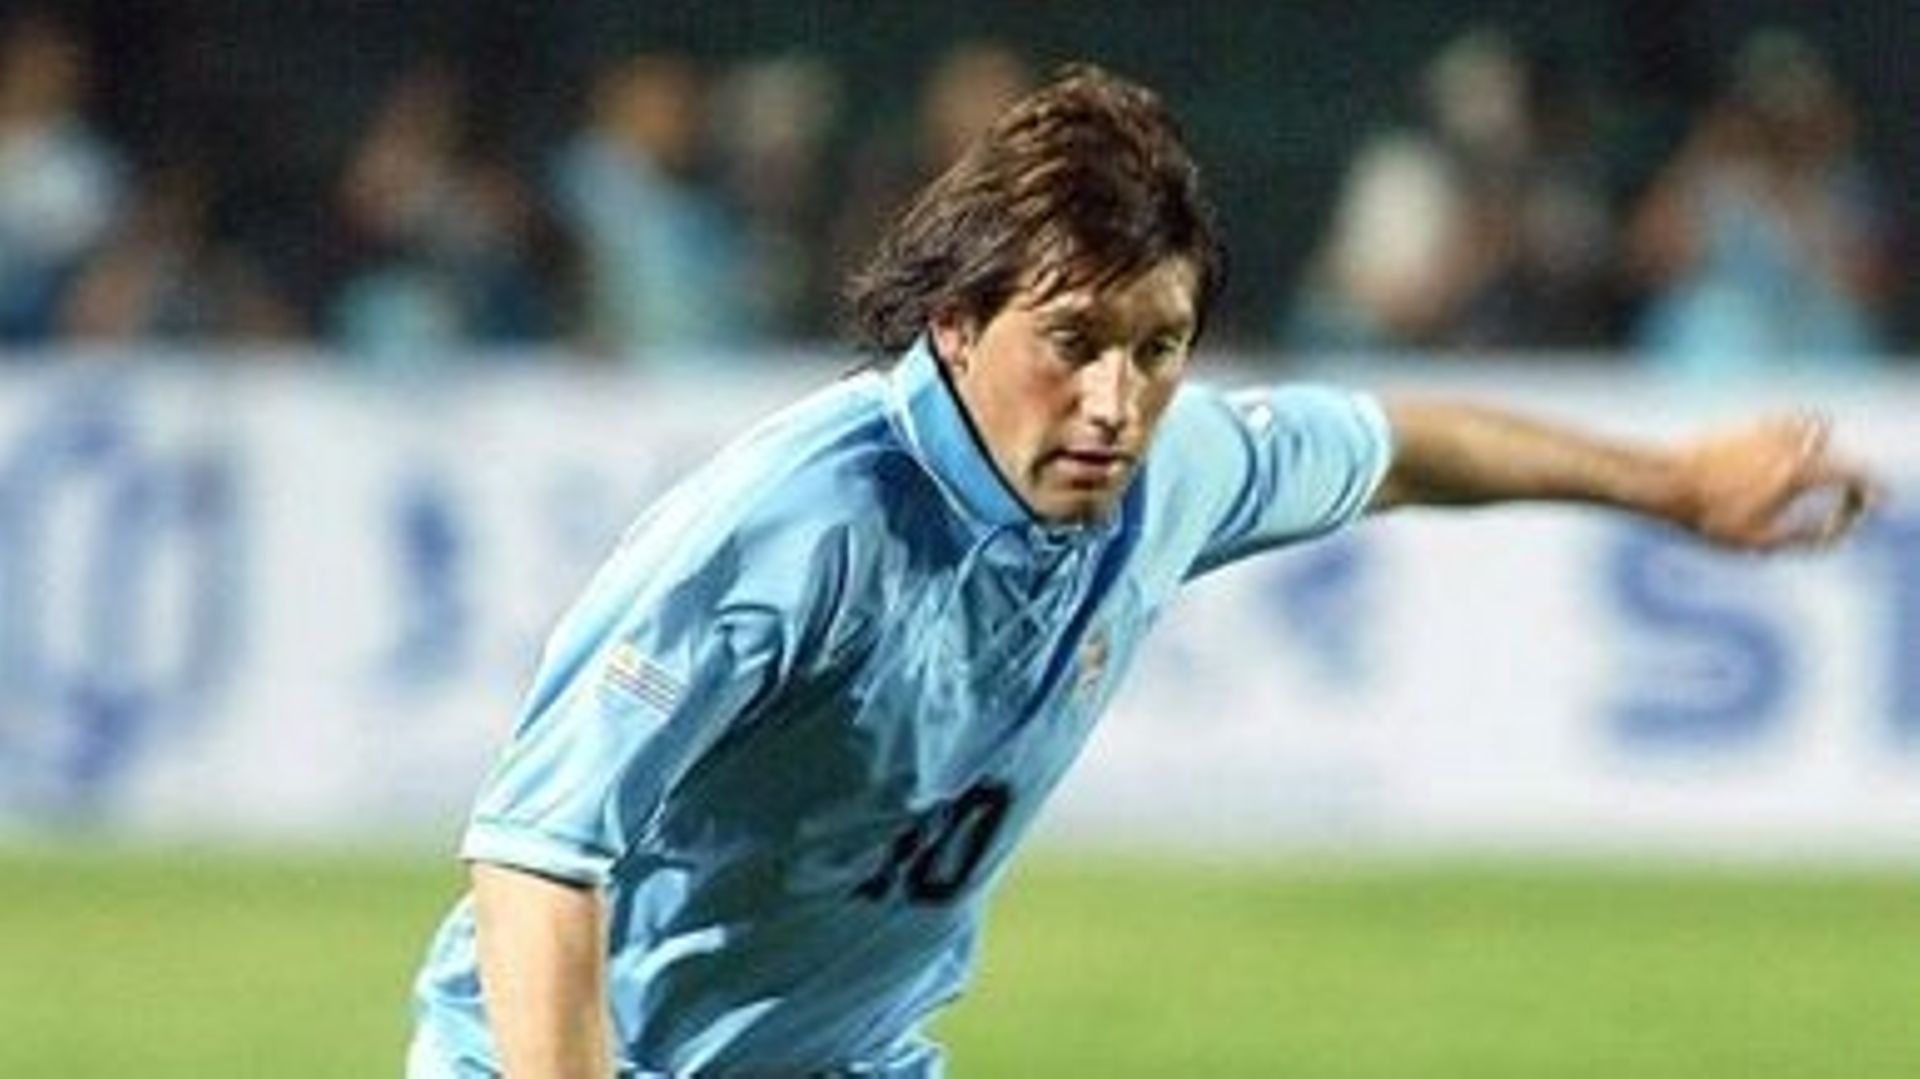 (FILES) In this file photo taken on May 16, 2002 Uruguay’s then Perugia midfielder Fabian O’Neill runs with the ball against China, in Shenyang, northeast China. O’Neill, 49, who had made his debut for Nacional in 1992 and then moved to Italian football